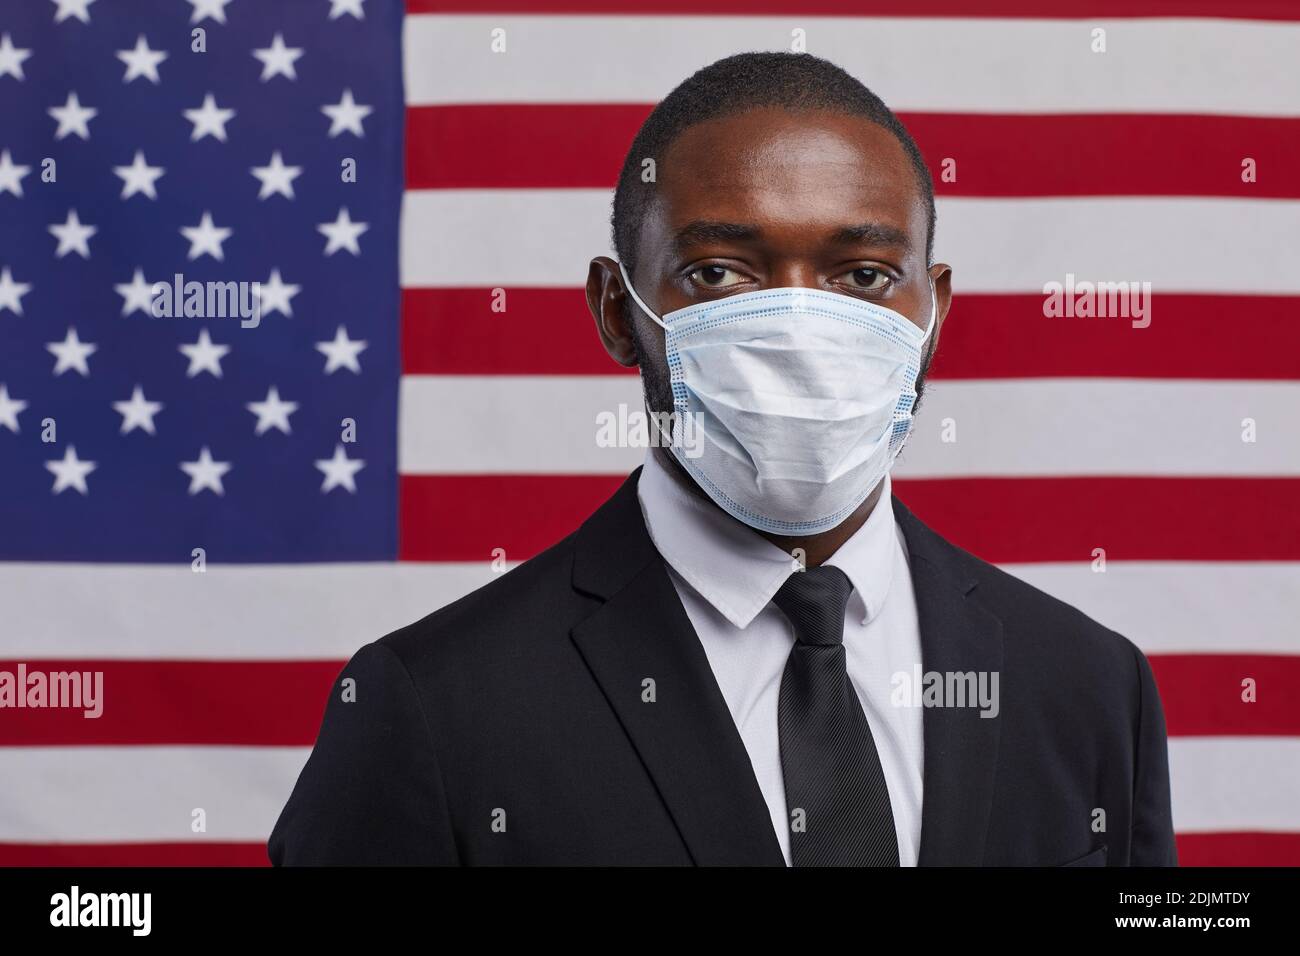 Portrait of African-American politician wearing mask and looking at camera while standing against USA flag background, copy space Stock Photo